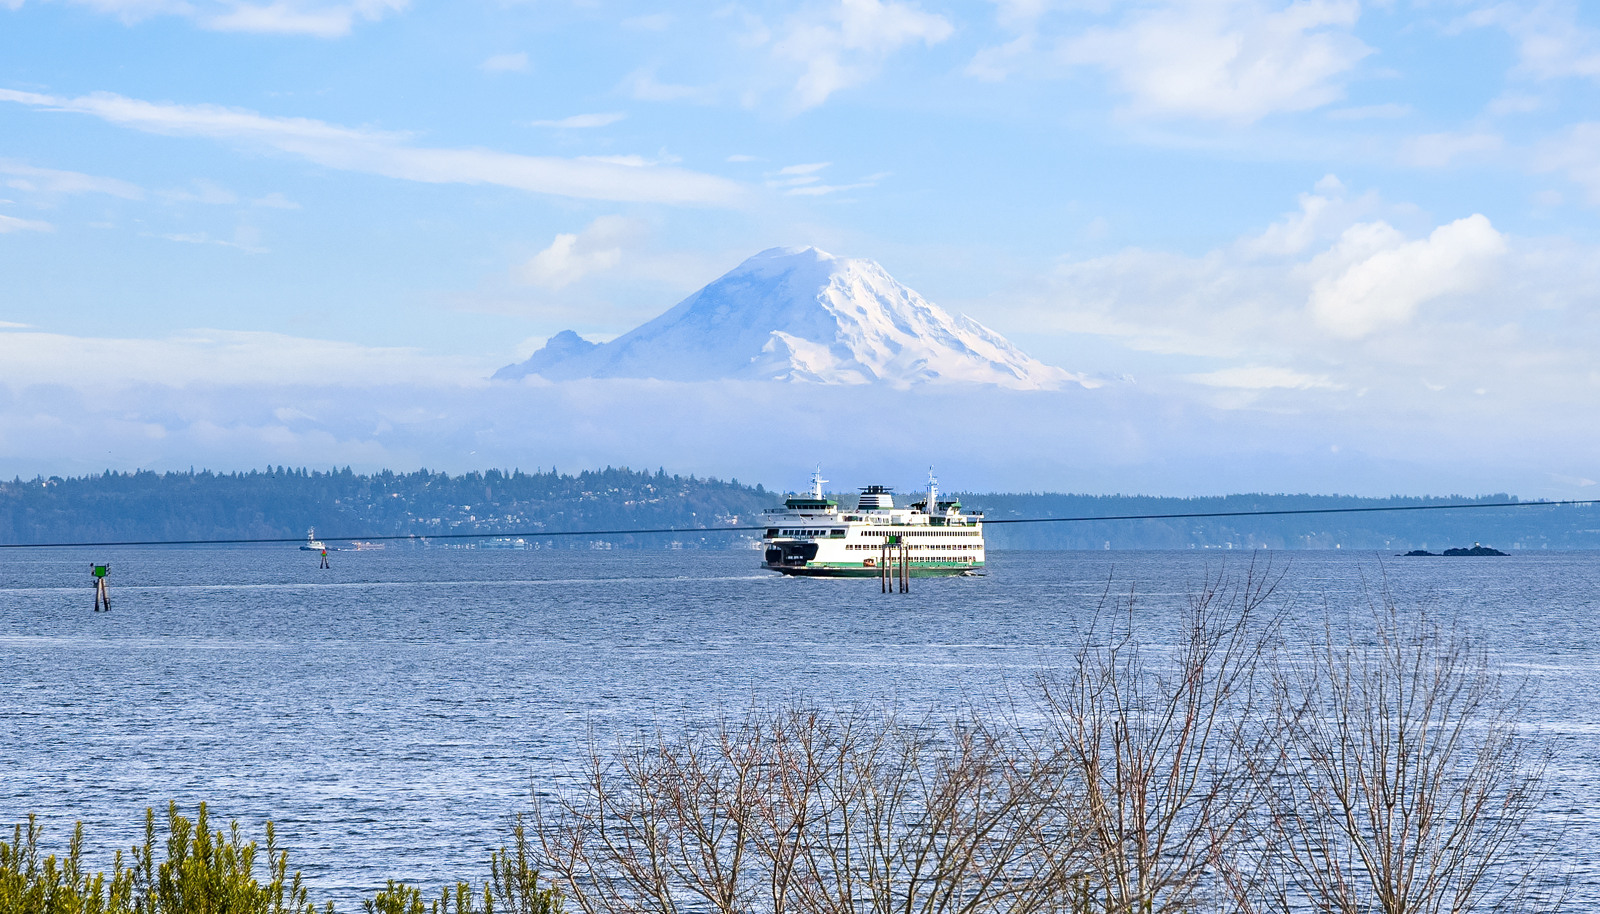 Breathtaking views of Mt. Rainier straight away with deep blue Puget Sound and passing ferries in the foreground.